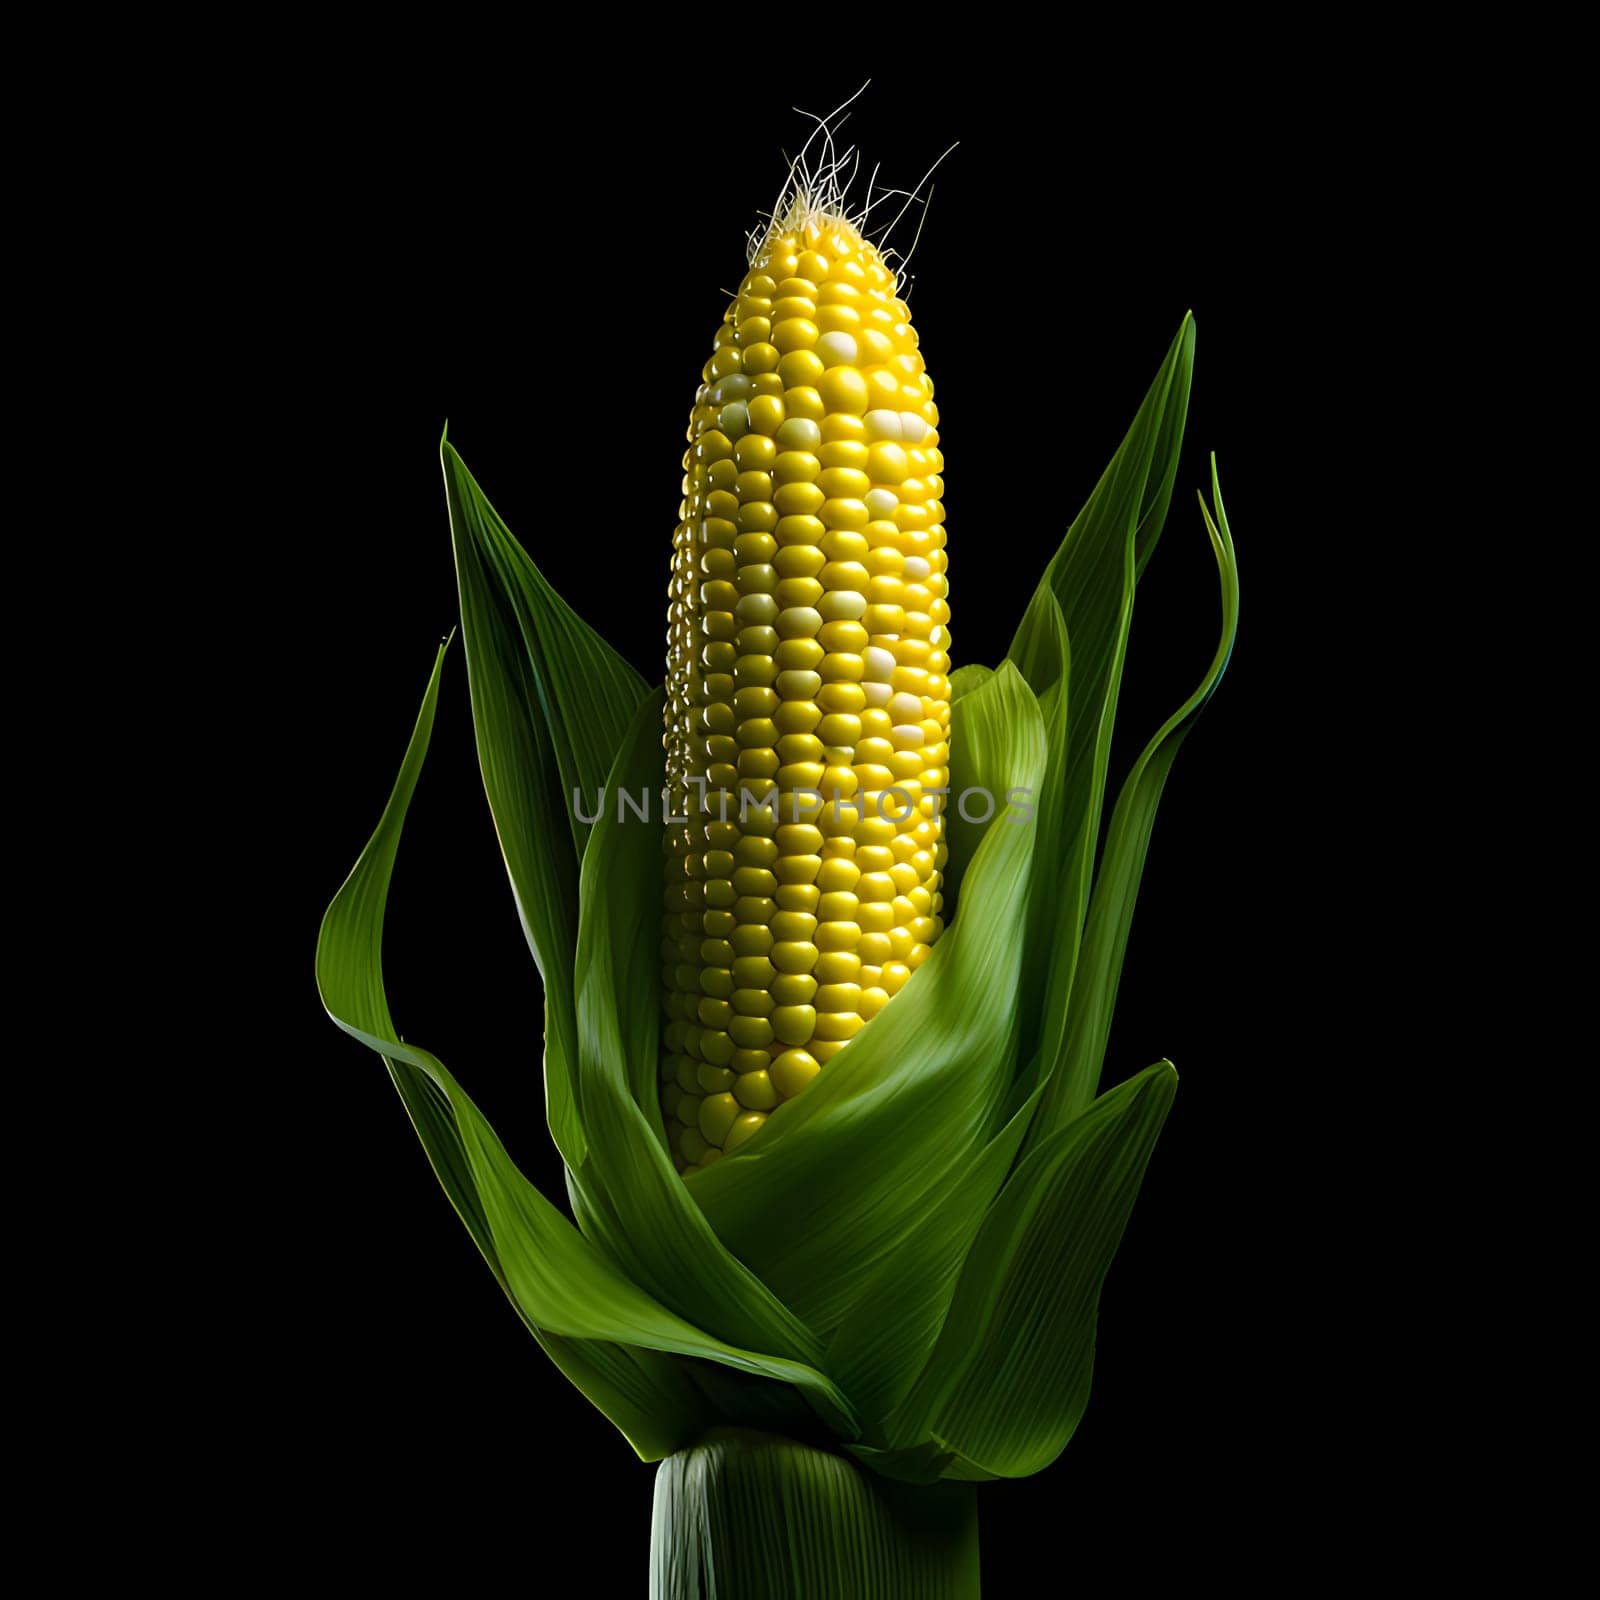 Yellow cob, corn with green leaves on the stalk, isolated black background. Corn as a dish of thanksgiving for the harvest. by ThemesS